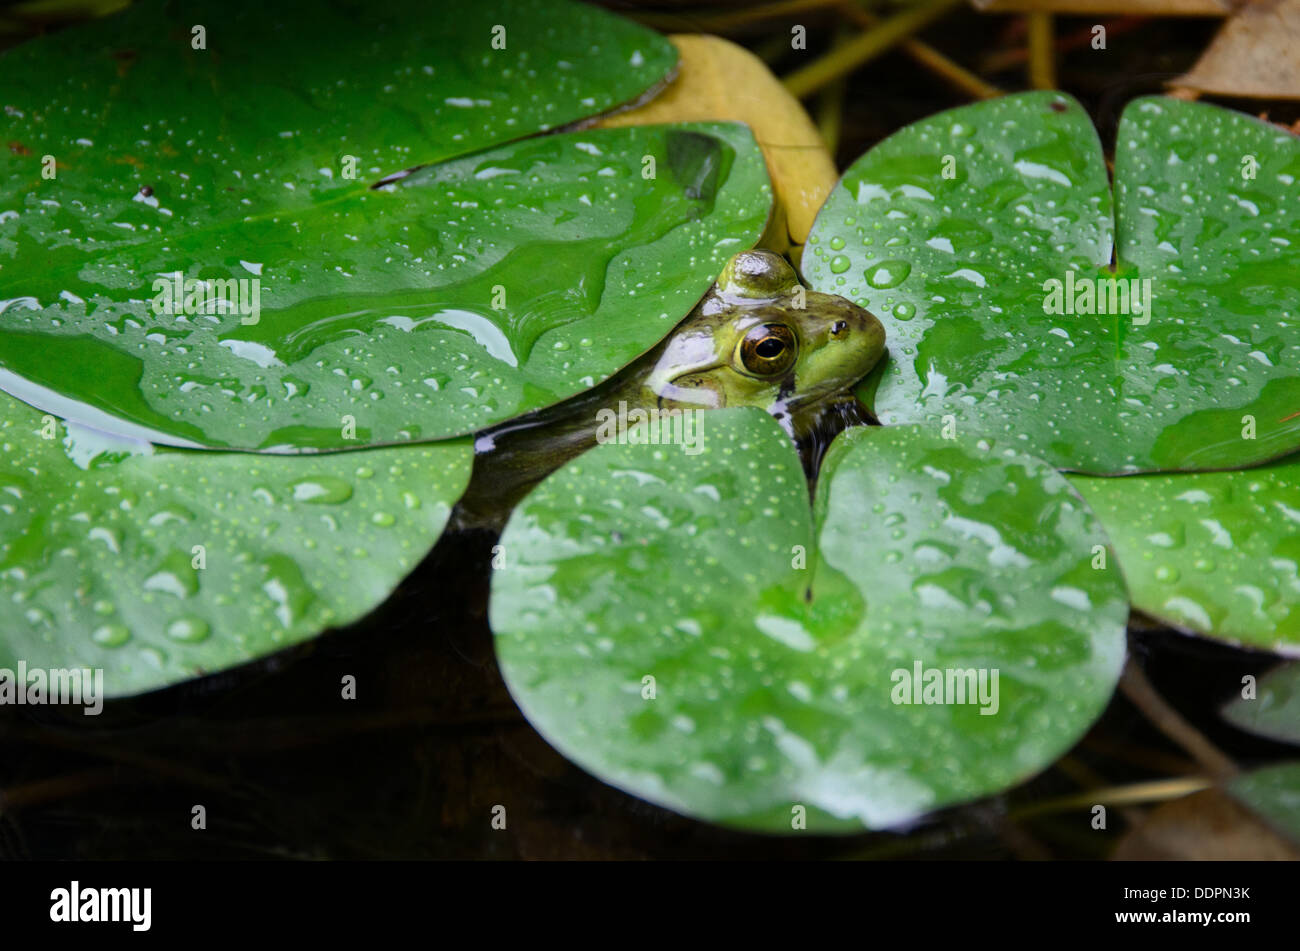 Northern Green Frog peeking out from under lily pads during a rain shower. Stock Photo